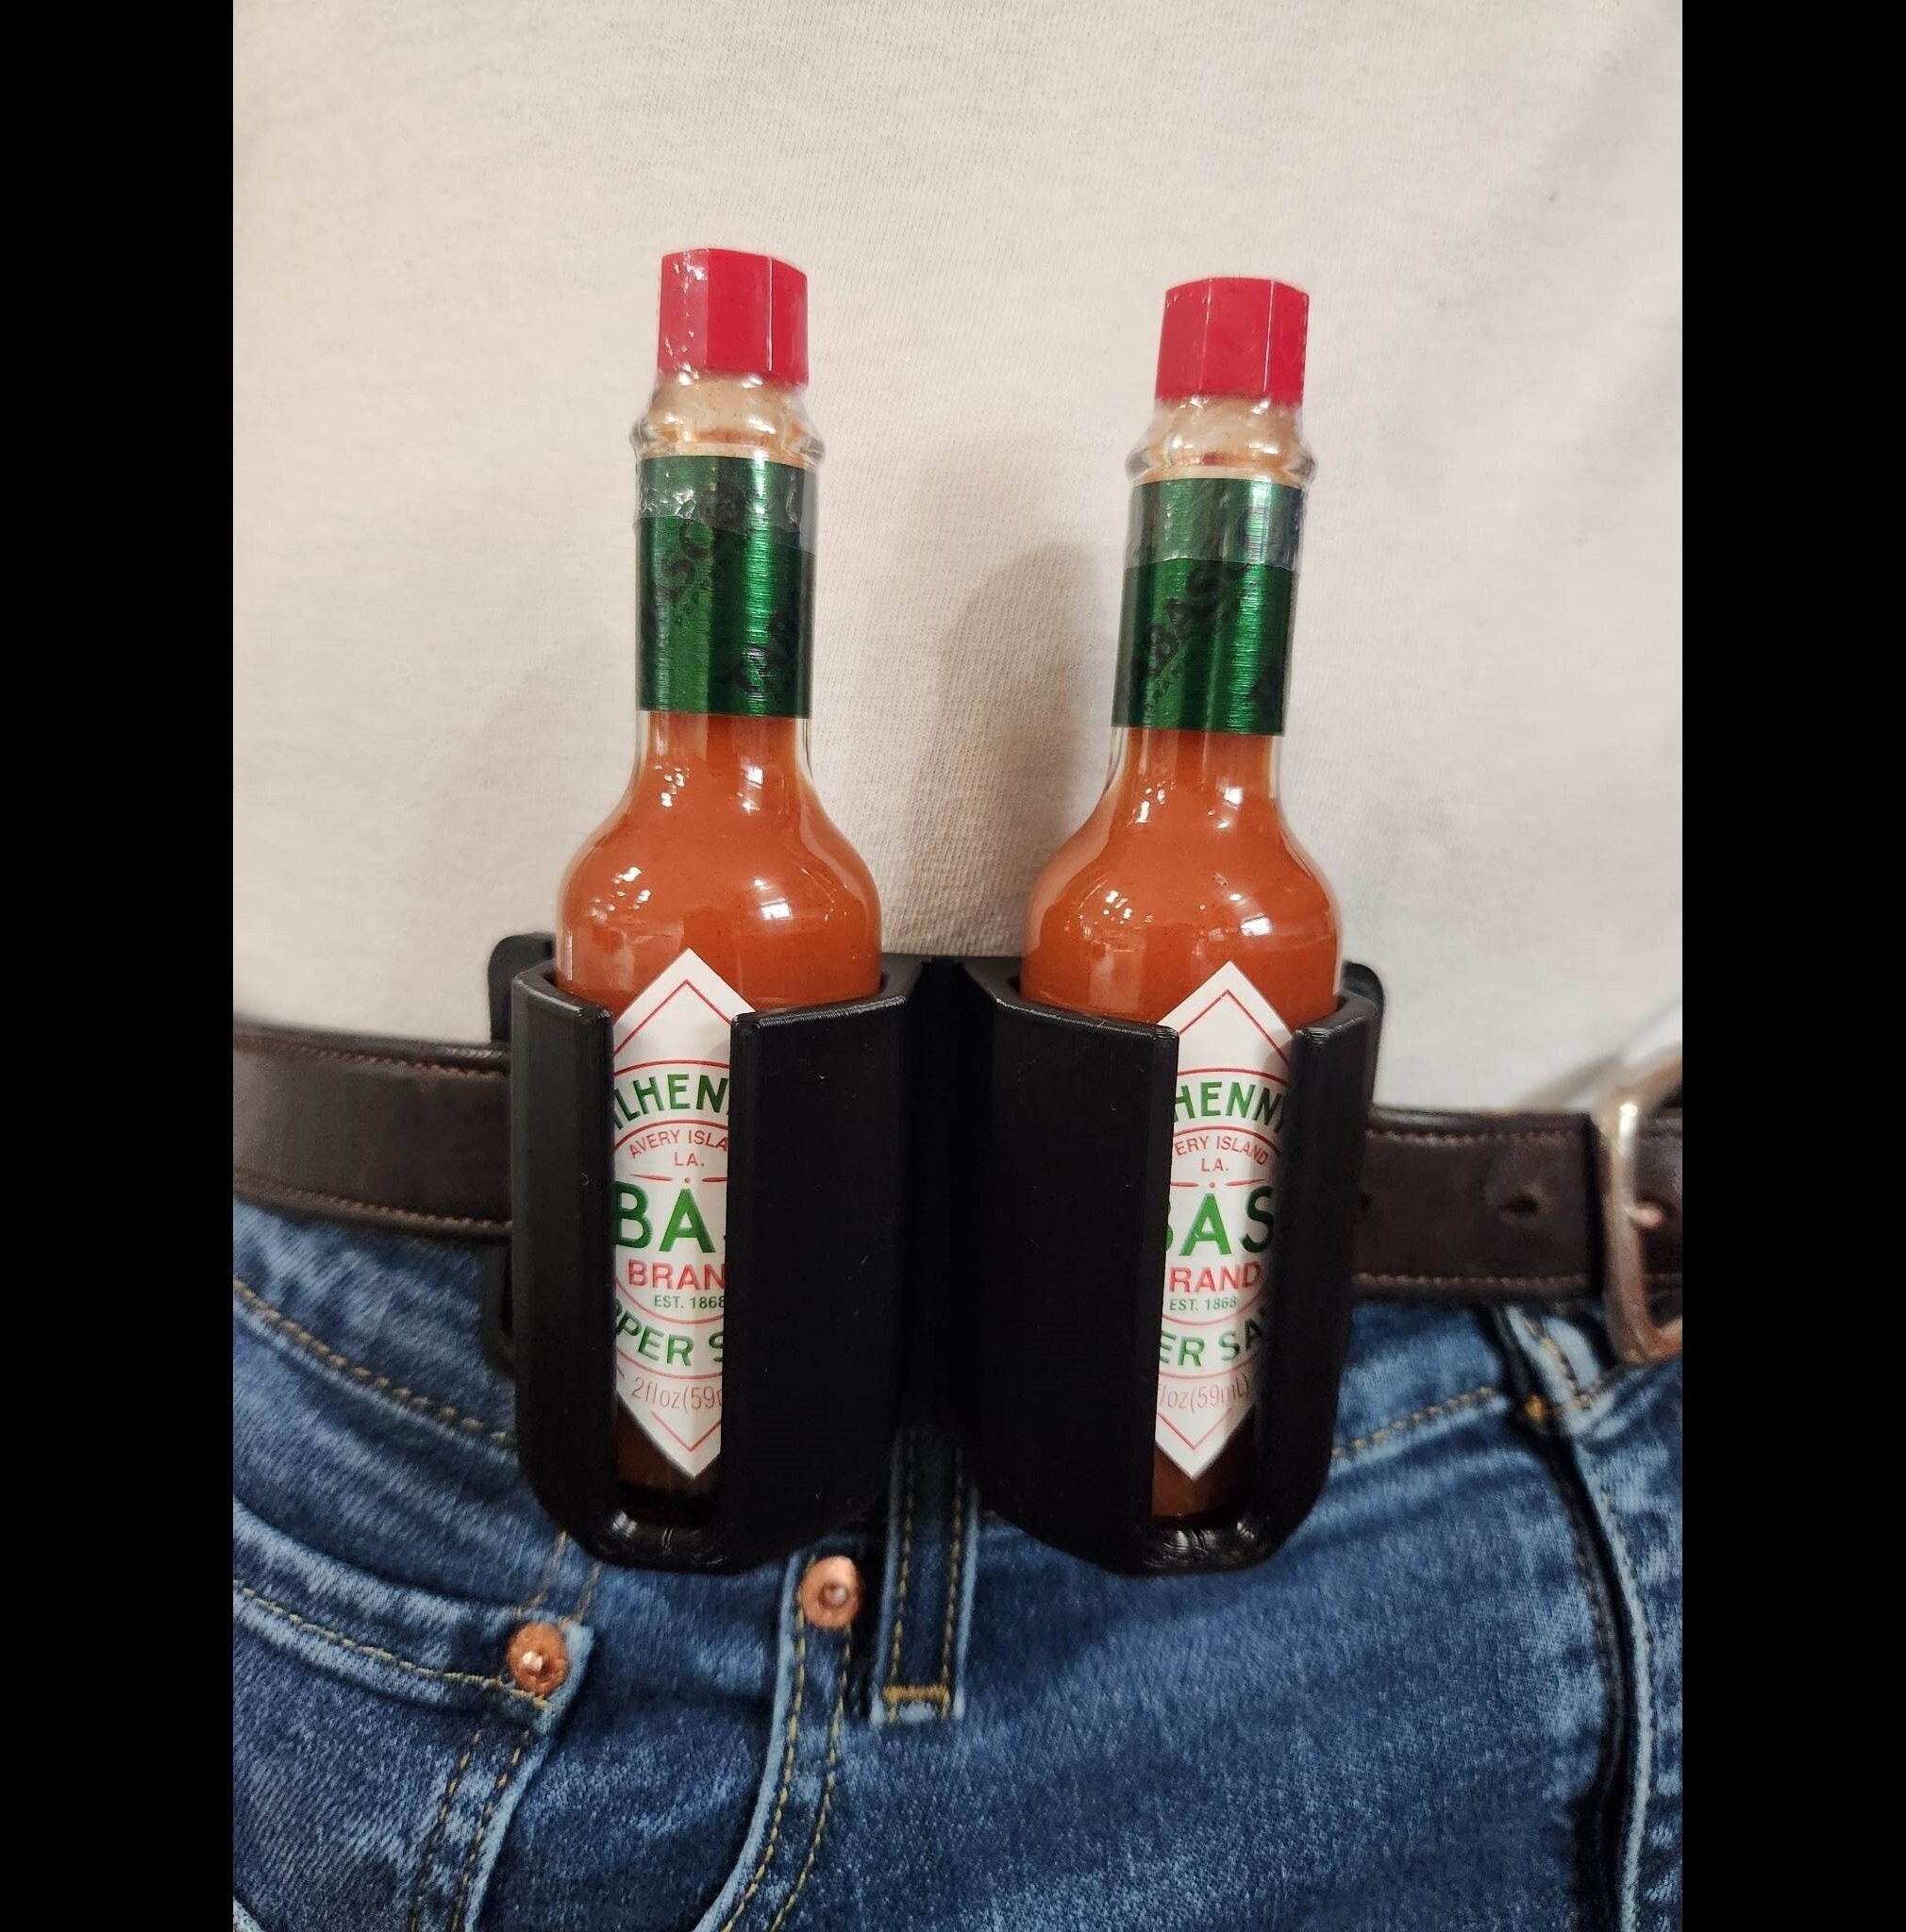 Mini Tabasco Hot Sauce Keychain - Includes 3 Mini Hot Sauce Bottles (.35oz)  With Travel Hot Sauce Key Chain and Refill Funnel - Red Tabasco Hot Sauce,  Green Sauce and Chipotle 